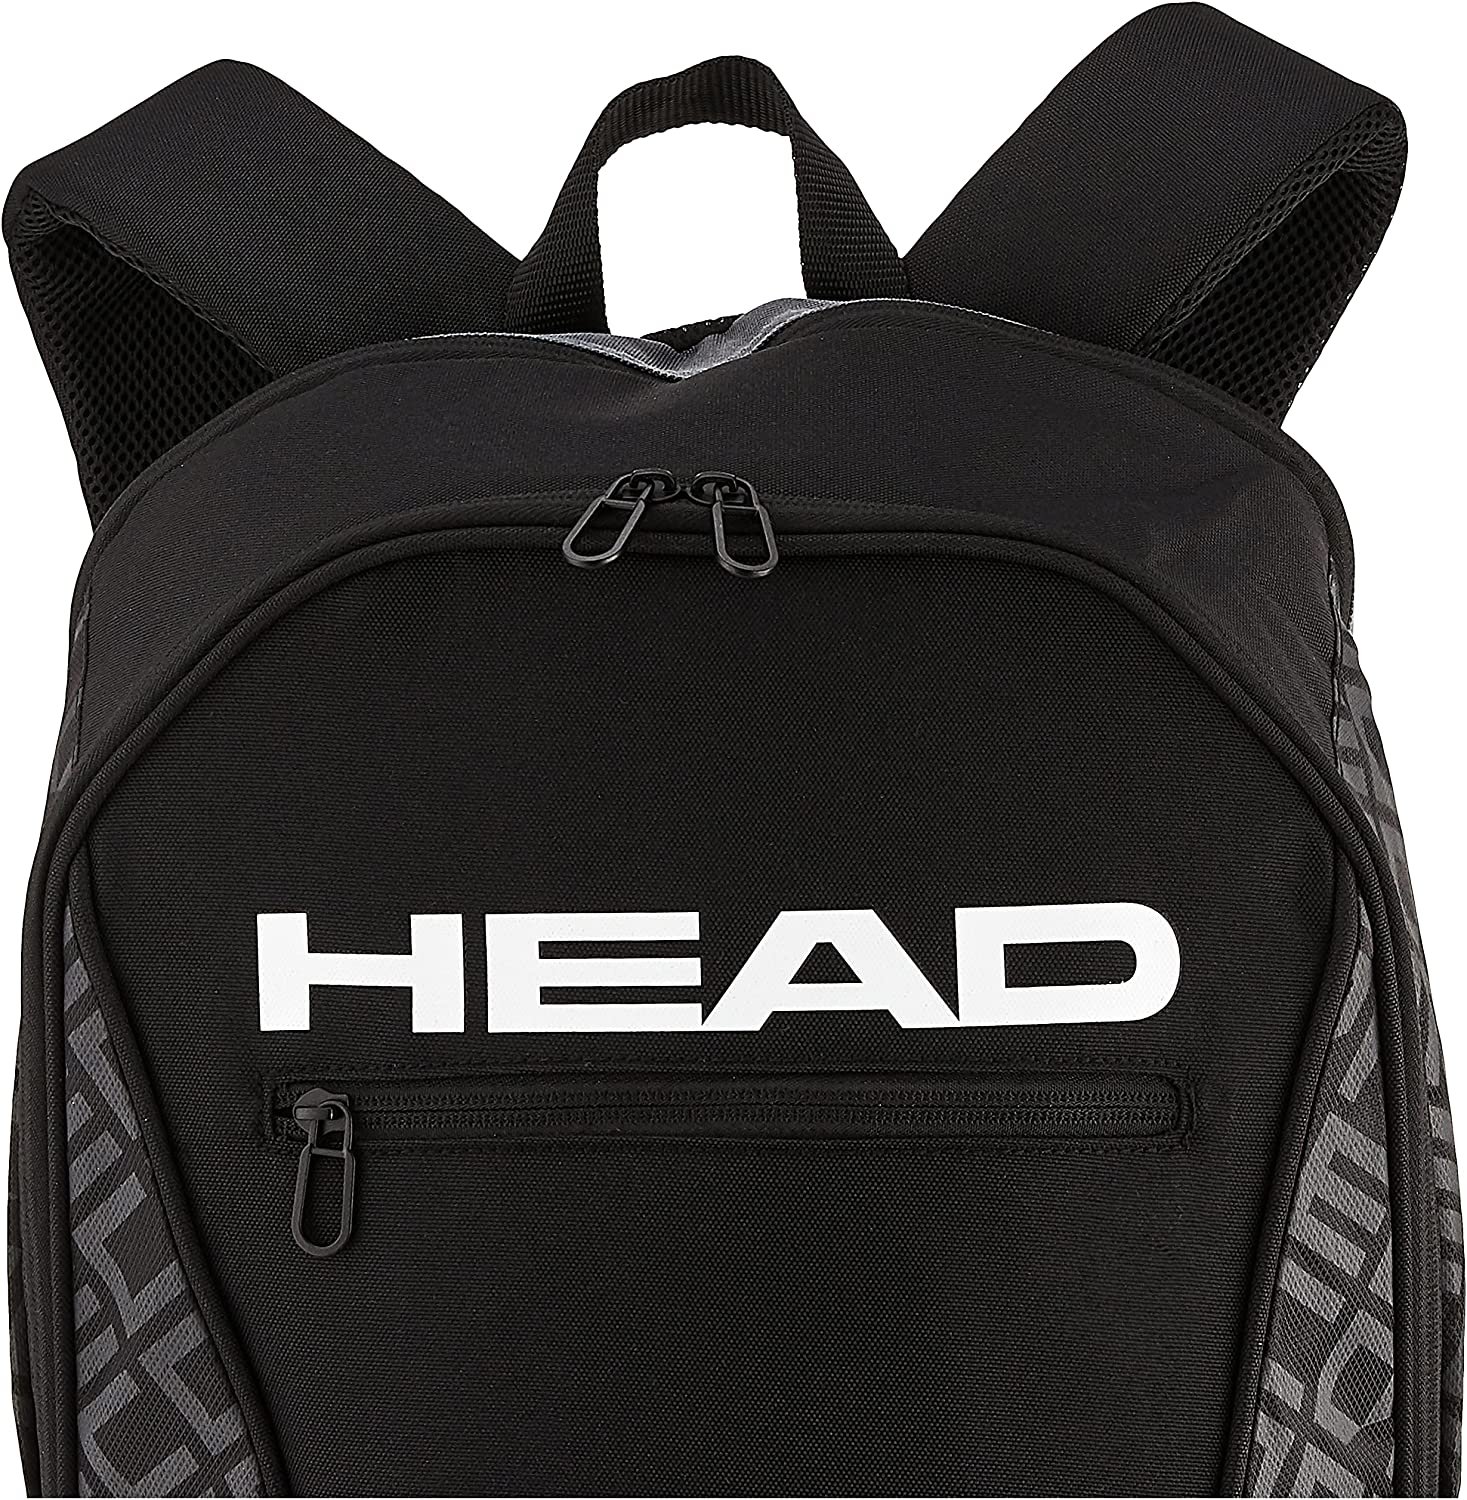 HEAD Gray and Black Tennis Sports Equipment Backpack - image 3 of 6